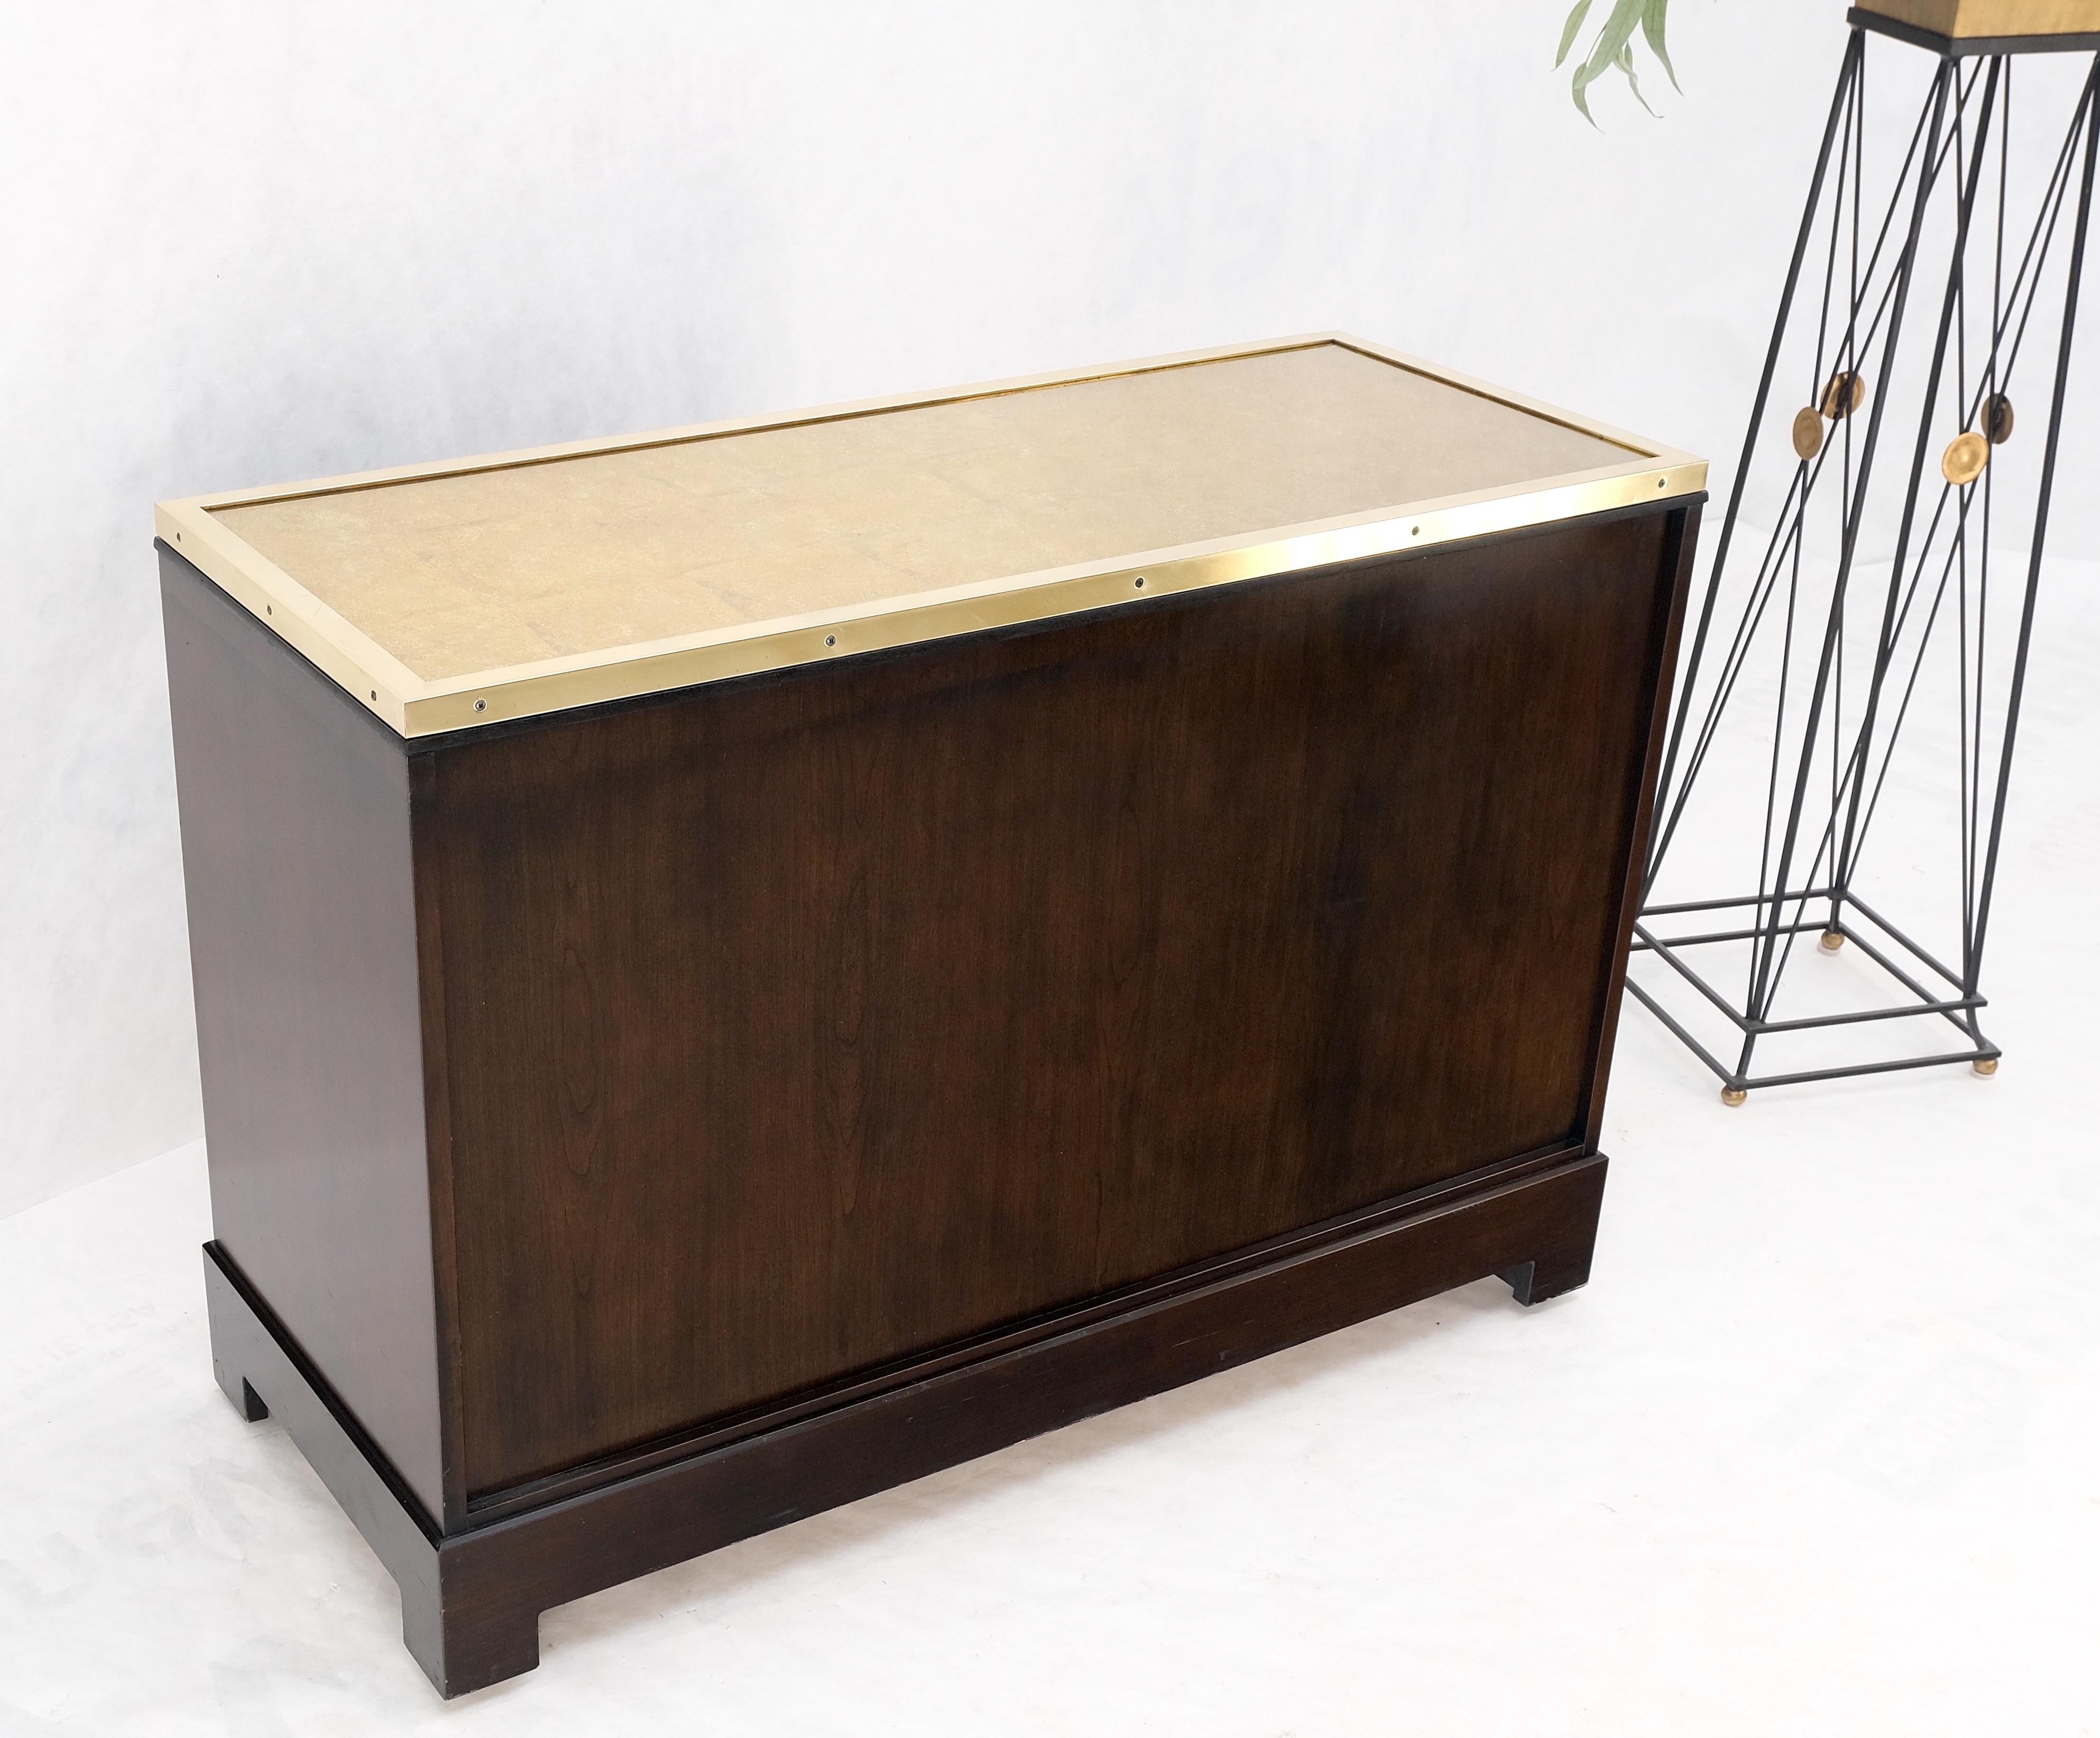 Campaign Style 6 Drawers Brass Drop Pulls Mid-Century Modern Bachelor Chest Mint For Sale 8